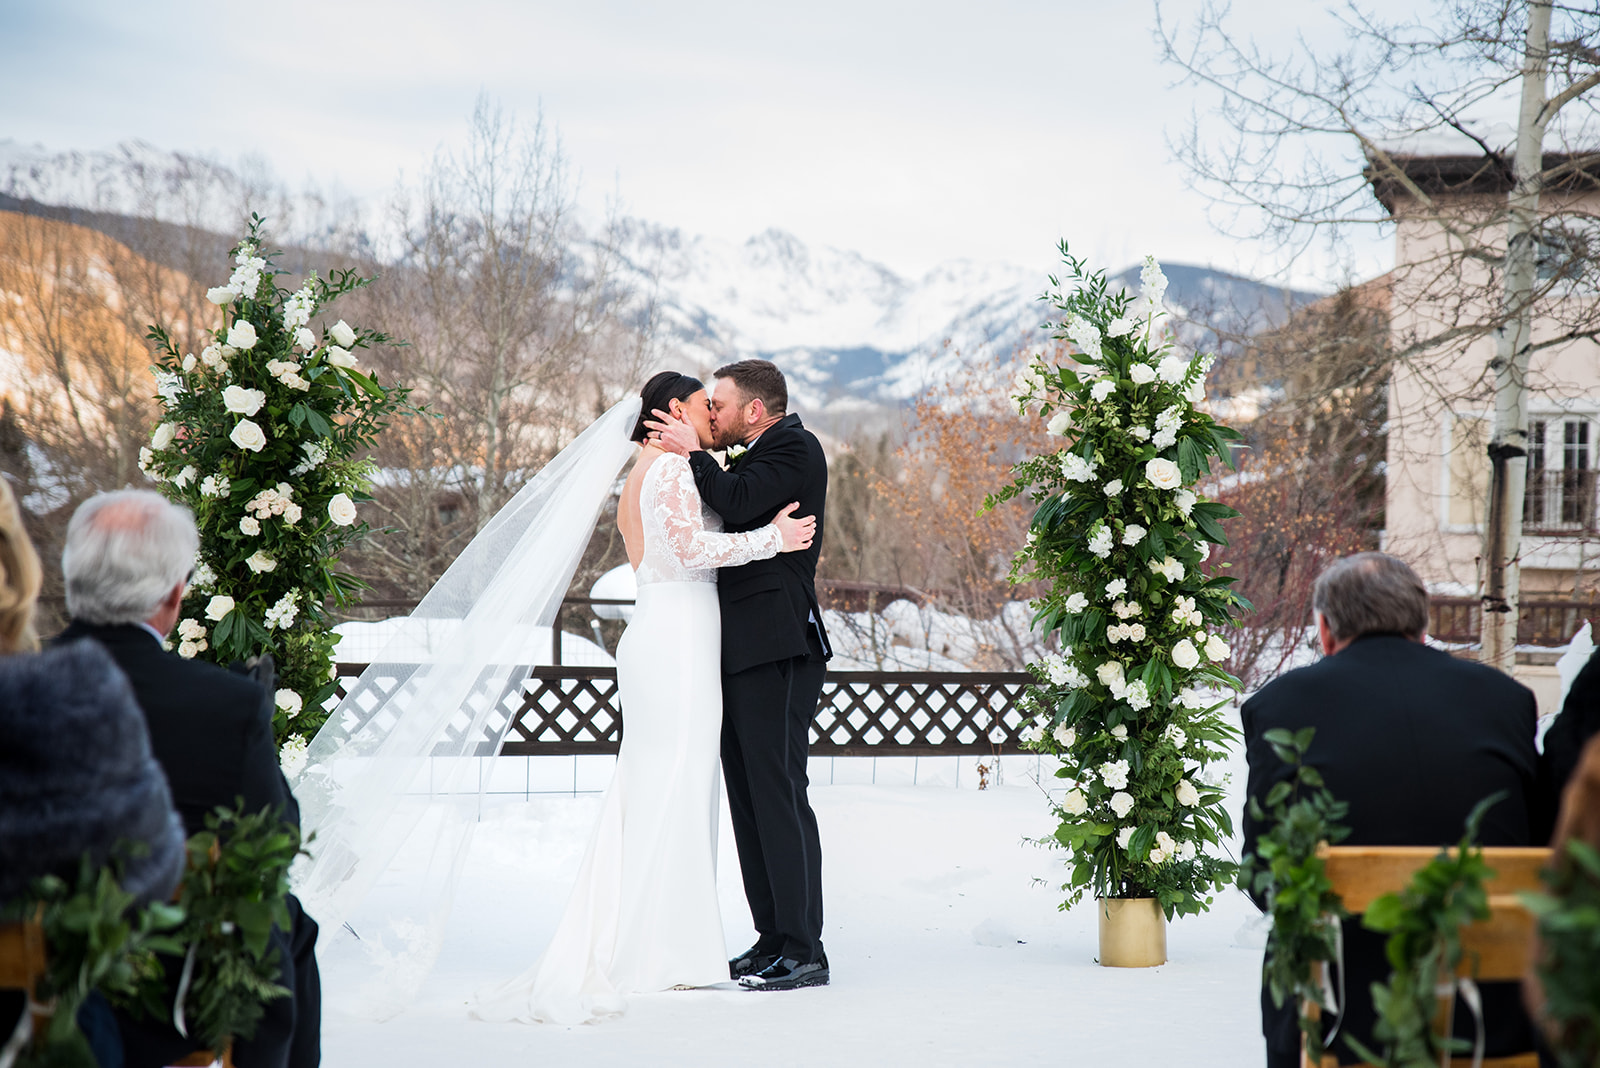 Bride and groom share first kiss at outdoor wedding ceremony in snowy Vail, Colorado.